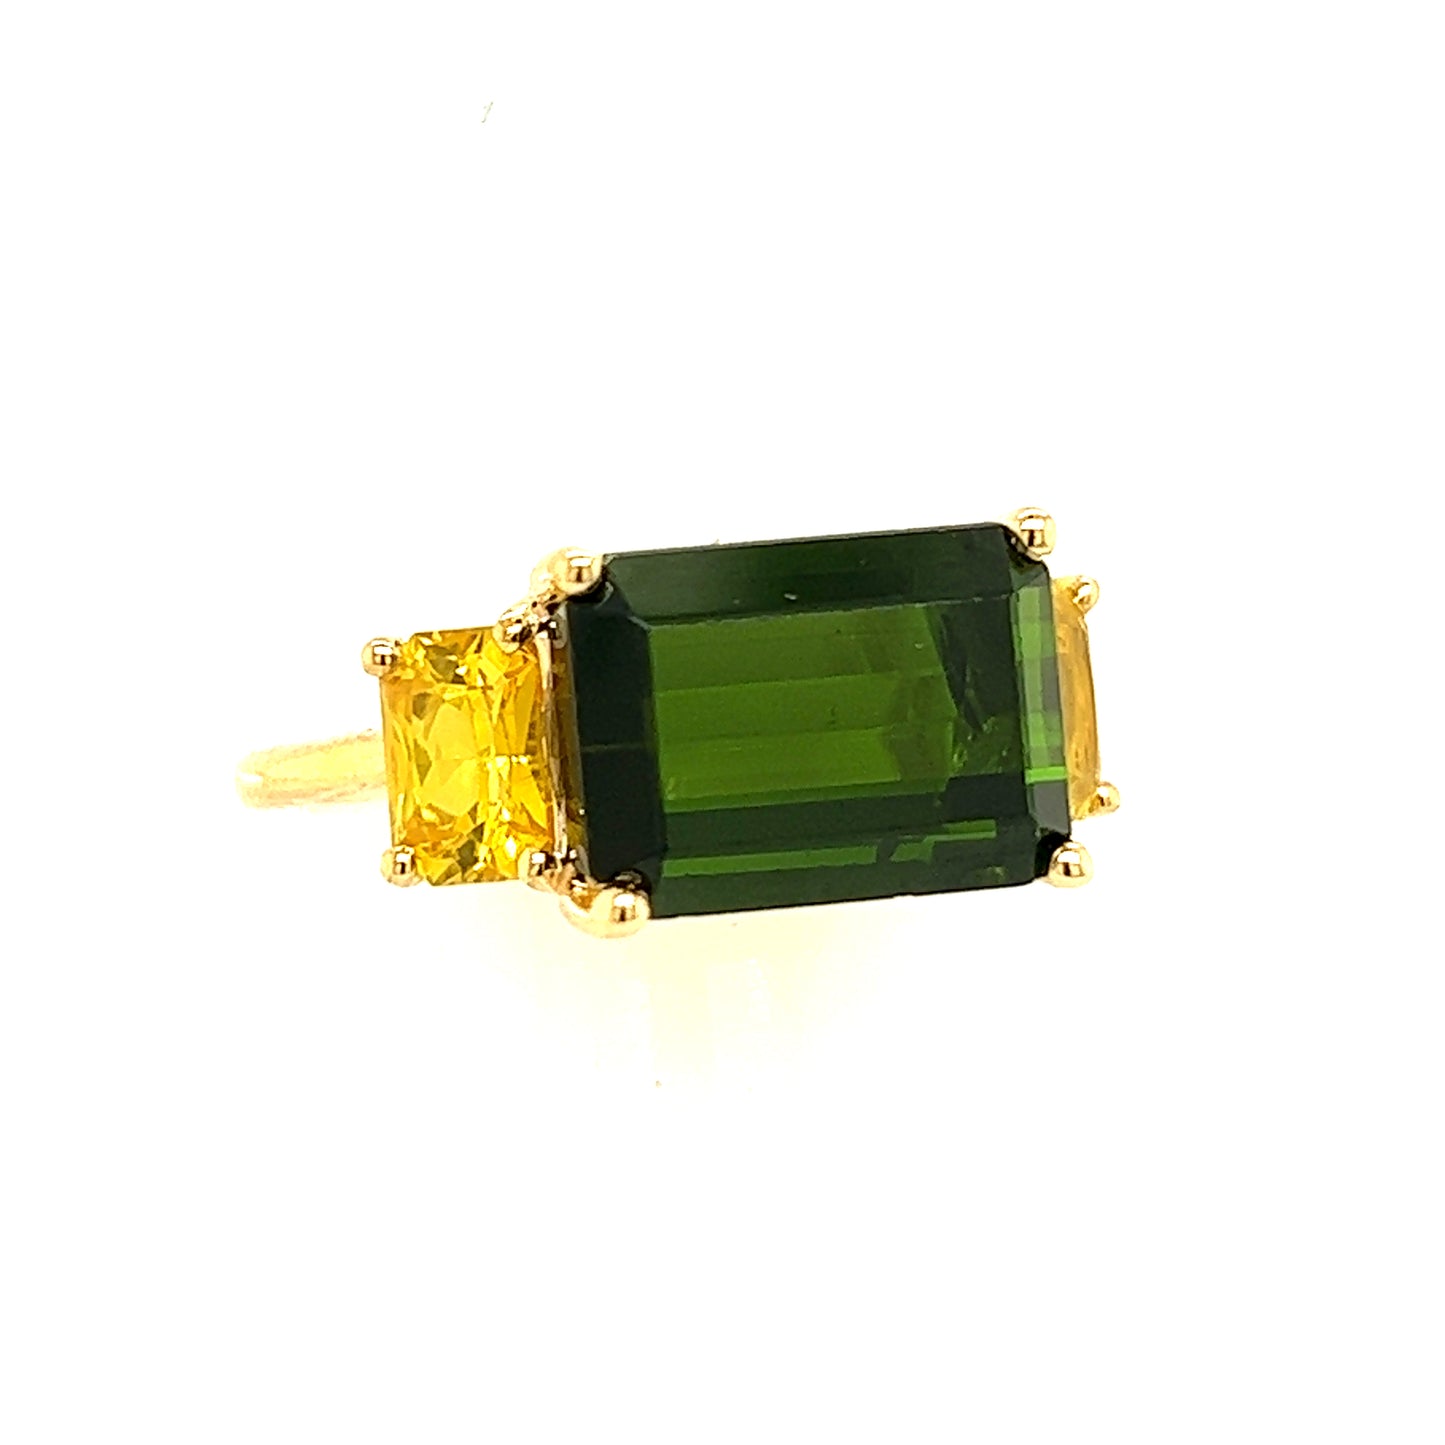 Natural Tourmaline Diamond Ring Size 7 14 Y Gold 6.15 TCW Certified $5,975 219225